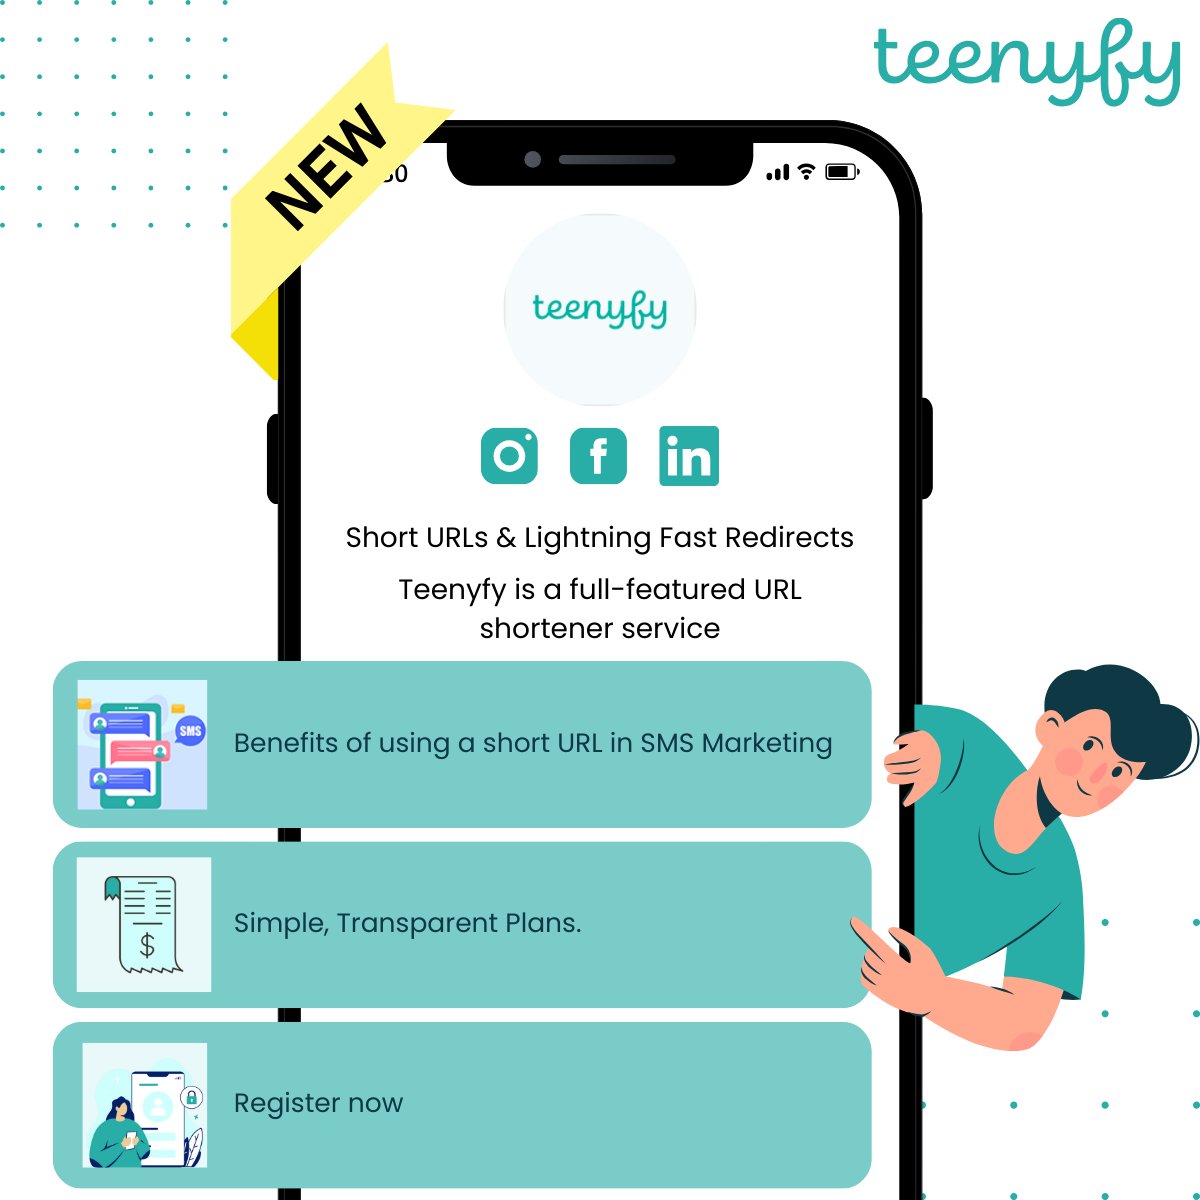 Just Launched!! Maximize your online impact with Teenyfy Bio Link. Where every click brings your audience closer to the heart of your content. Start your journey to better connectivity today! #Register now to start for free - tnfy.pw/lnsignup #biolink #linkinbio